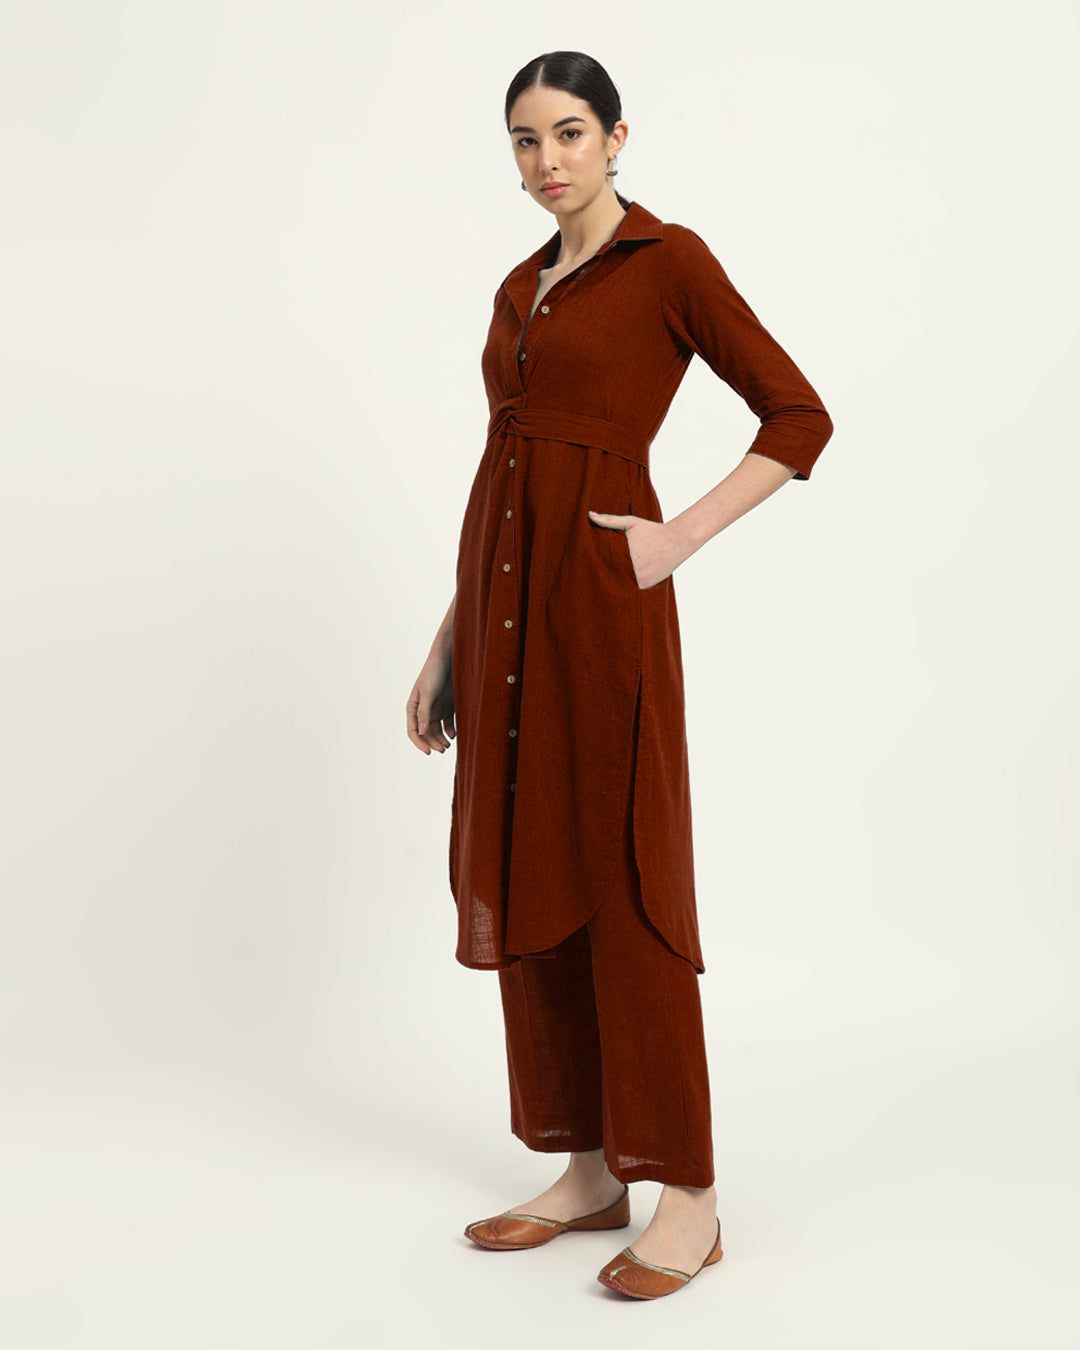 Combo: Iced Grey & Russet Red Bellisimo Belted Solid Kurta